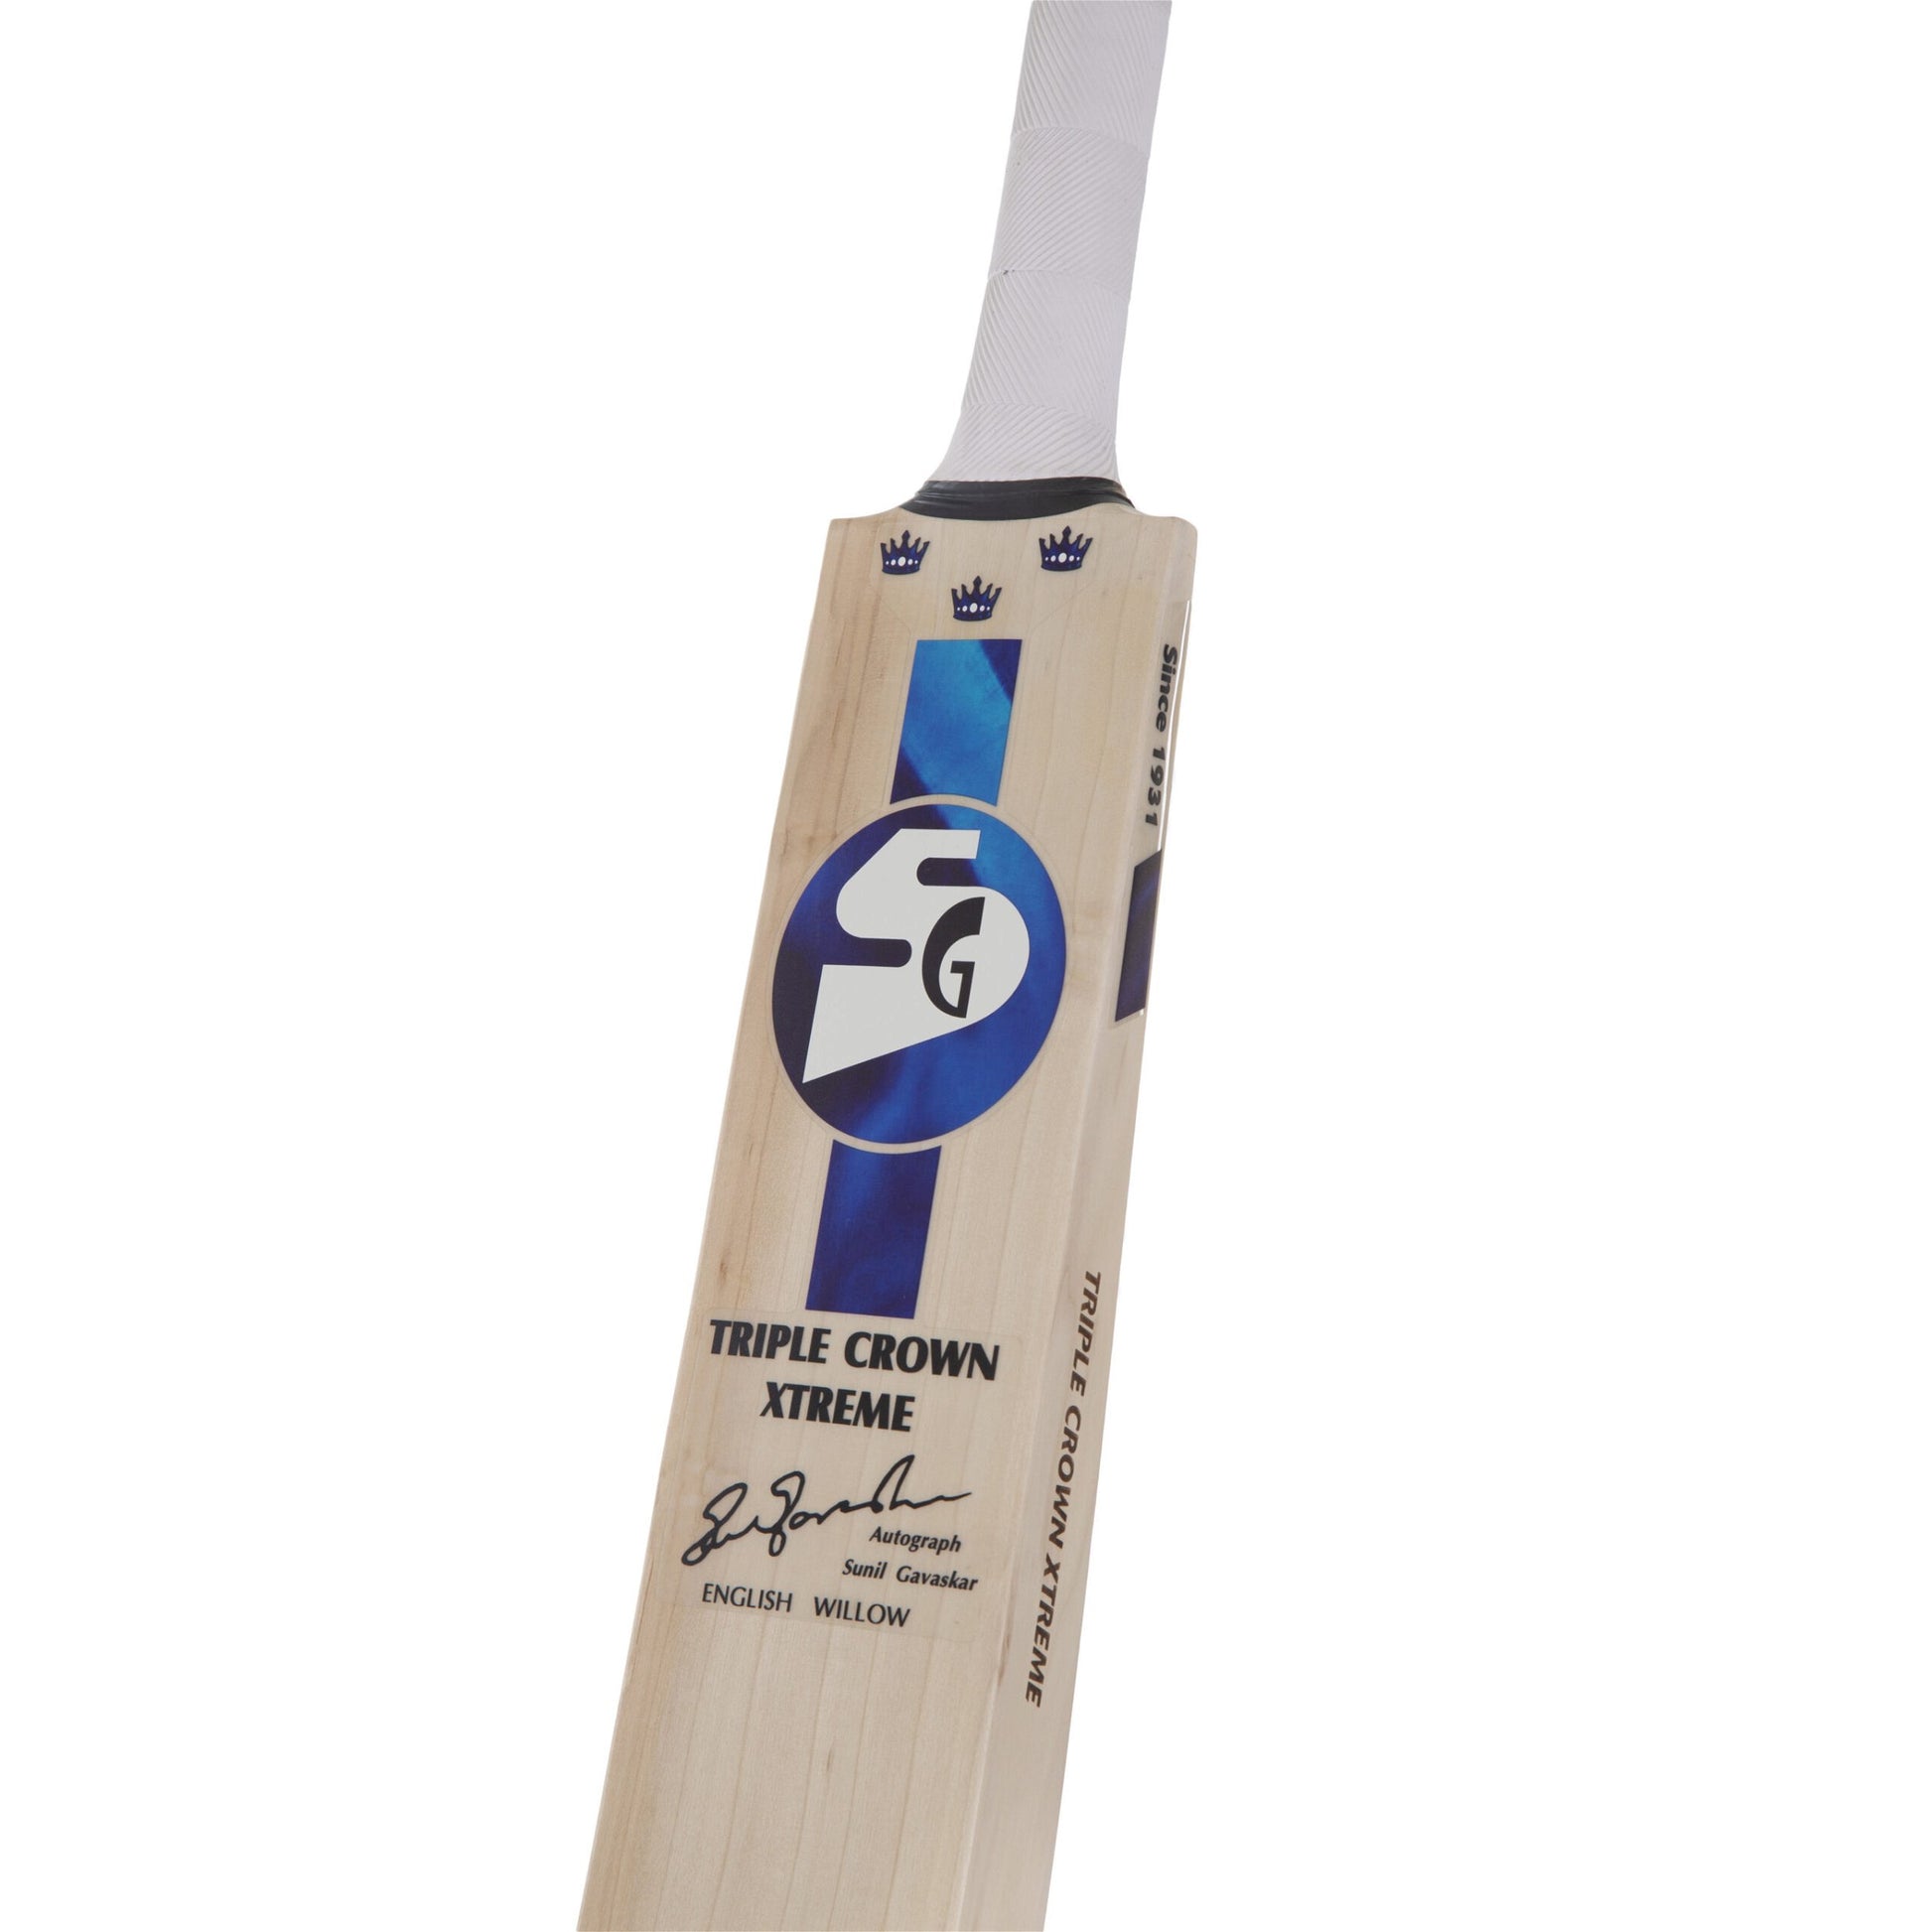 SG Triple Crown Xtreme Finest English Willow grade 3 Cricket Bat (Leather Ball)